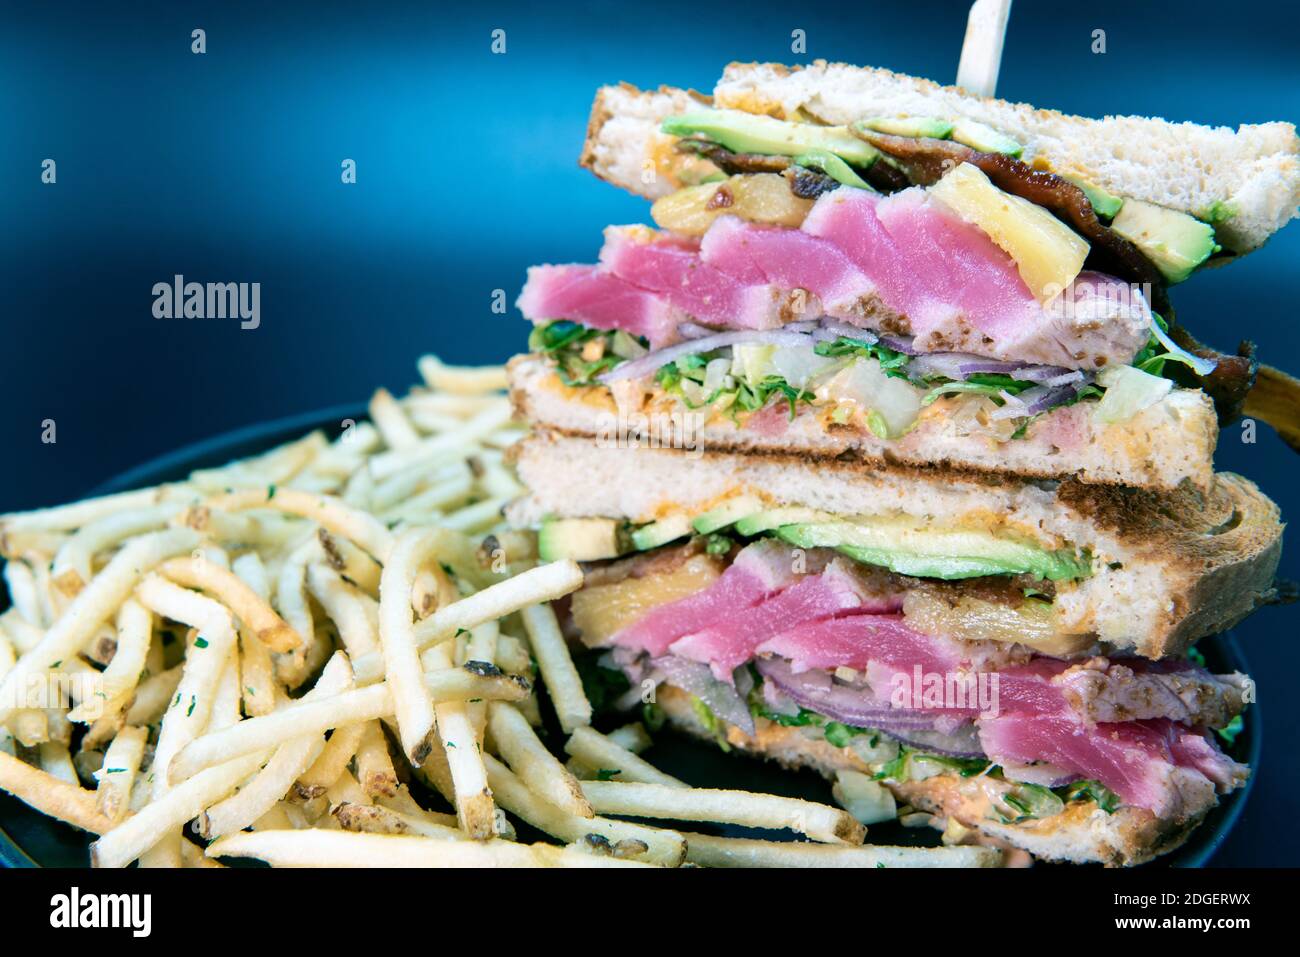 Tall order of Ahi tuna club sandwich and french fries loaded with all the toppings that the sour dough toast bread can hold Stock Photo